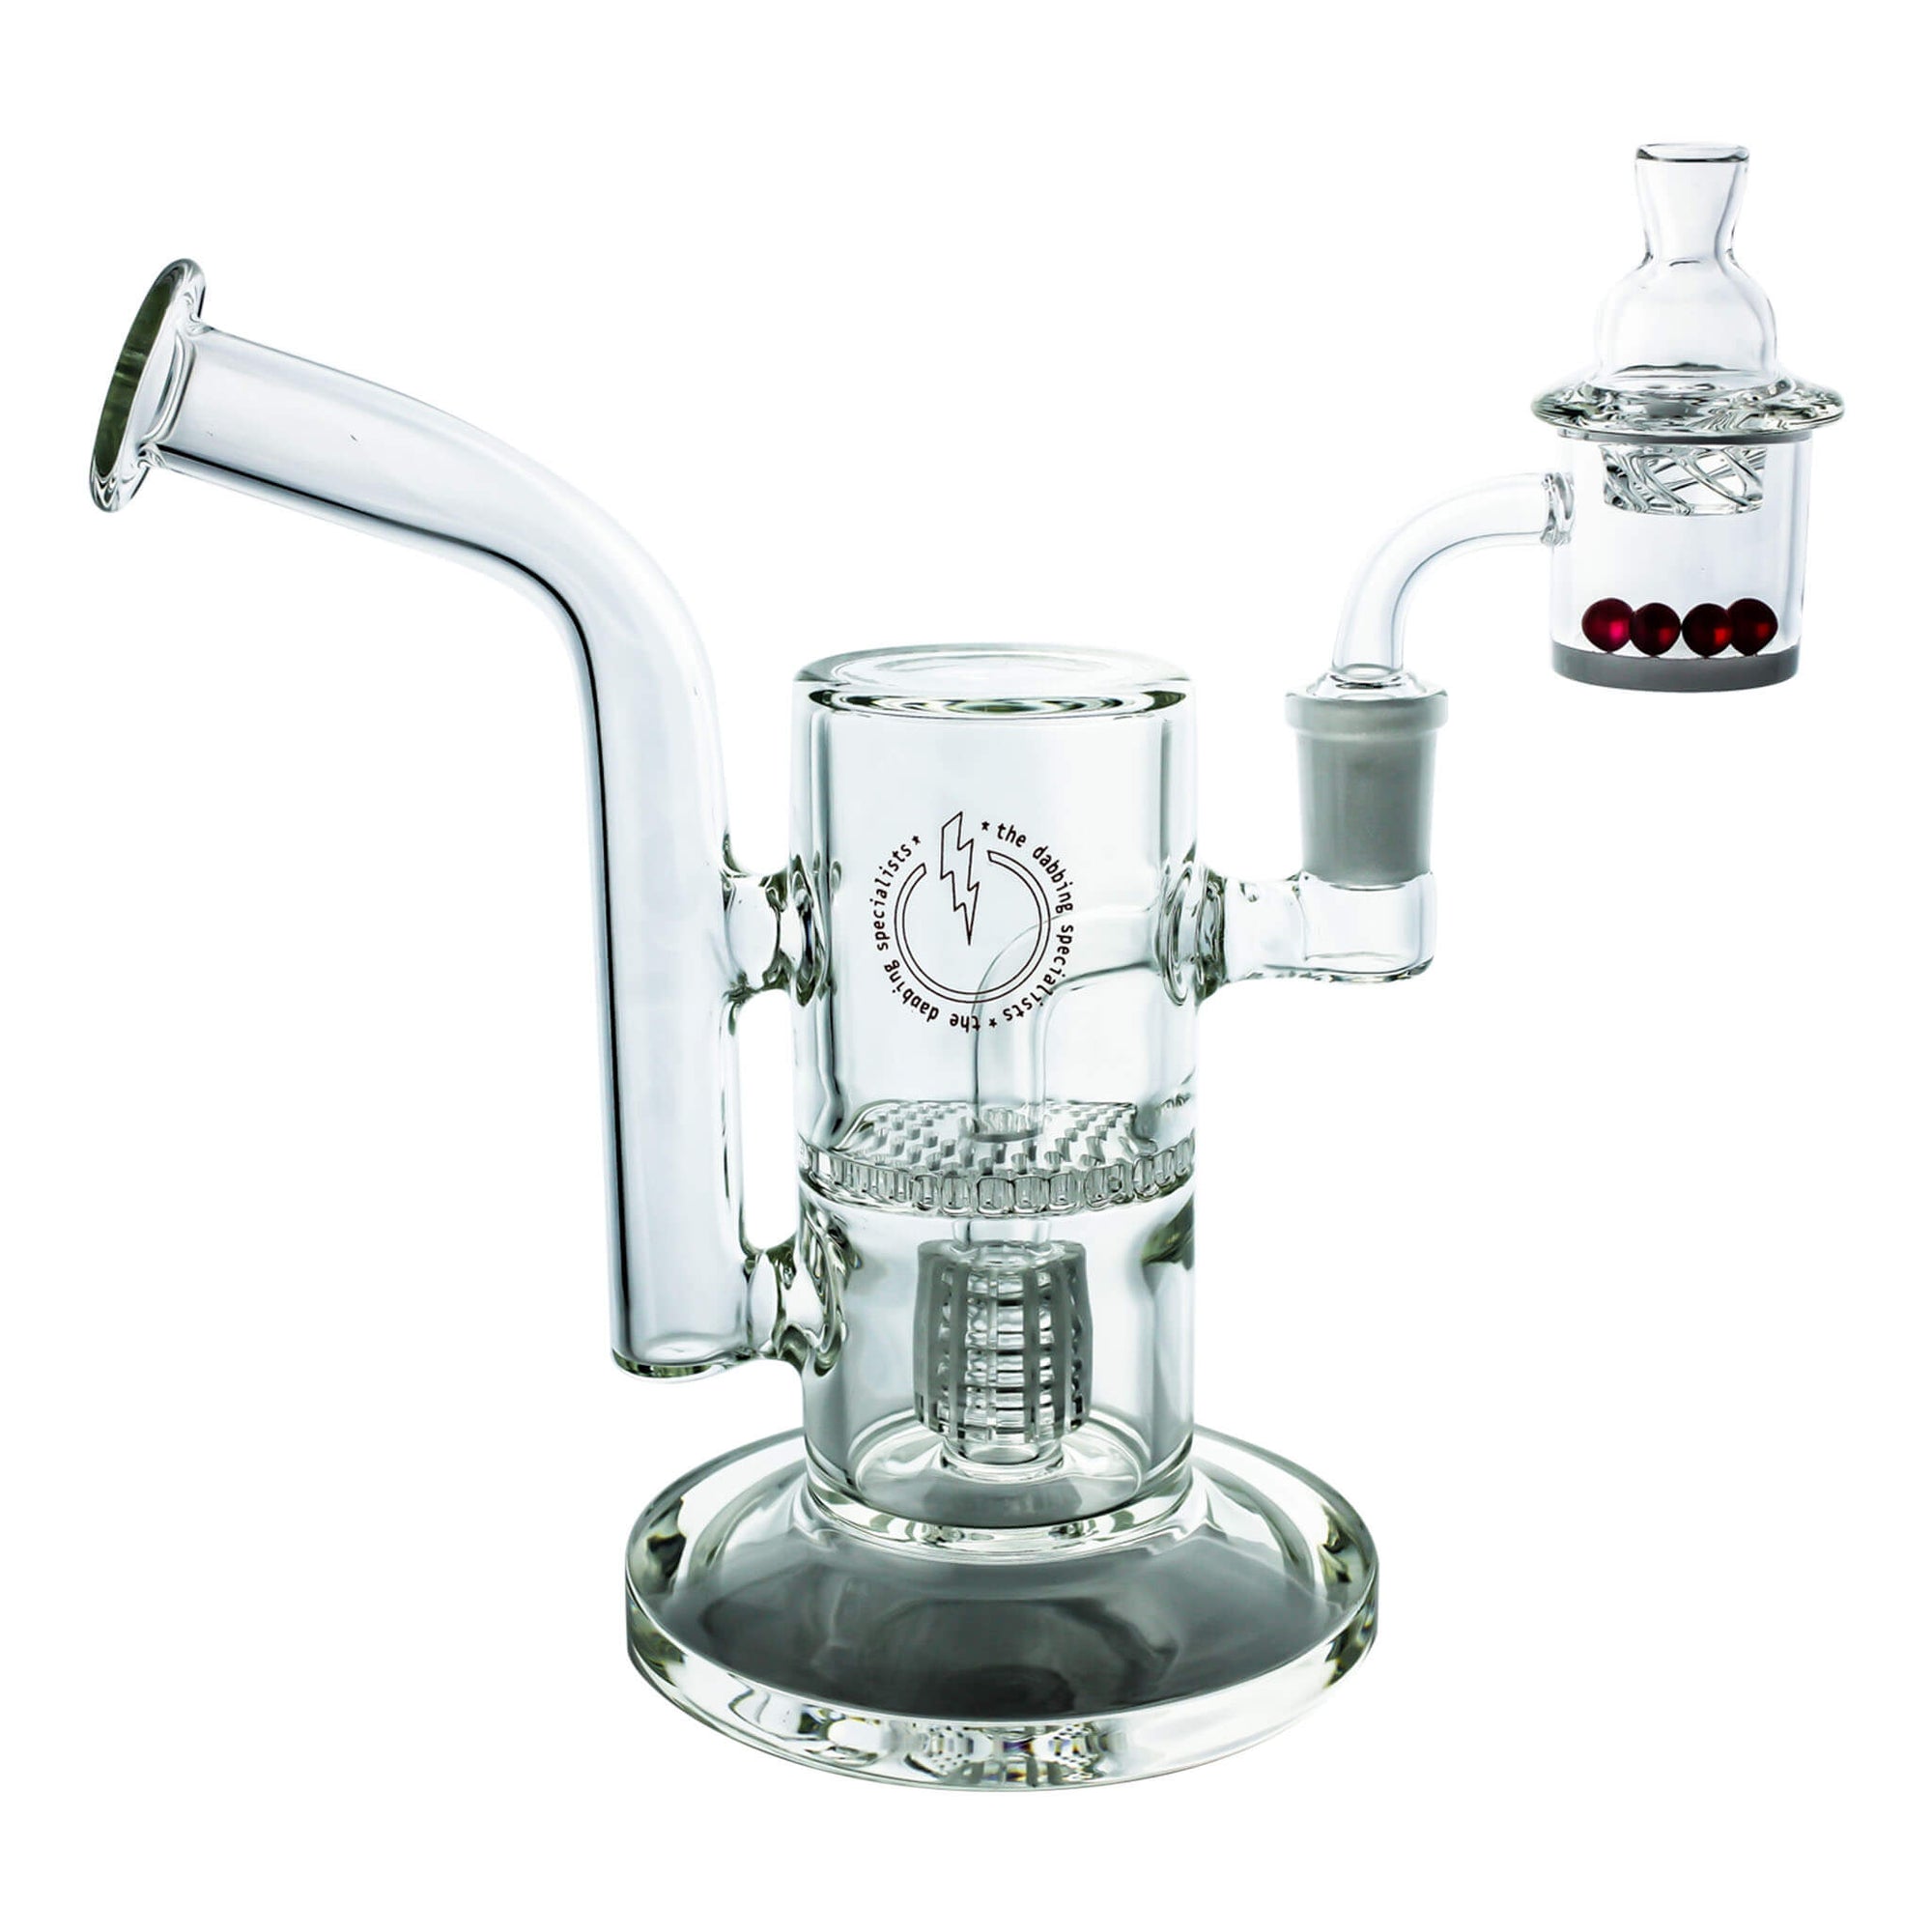 30mm Complete Dabbing Kit #7 | Full Kit View Clear Carb Cap | DW